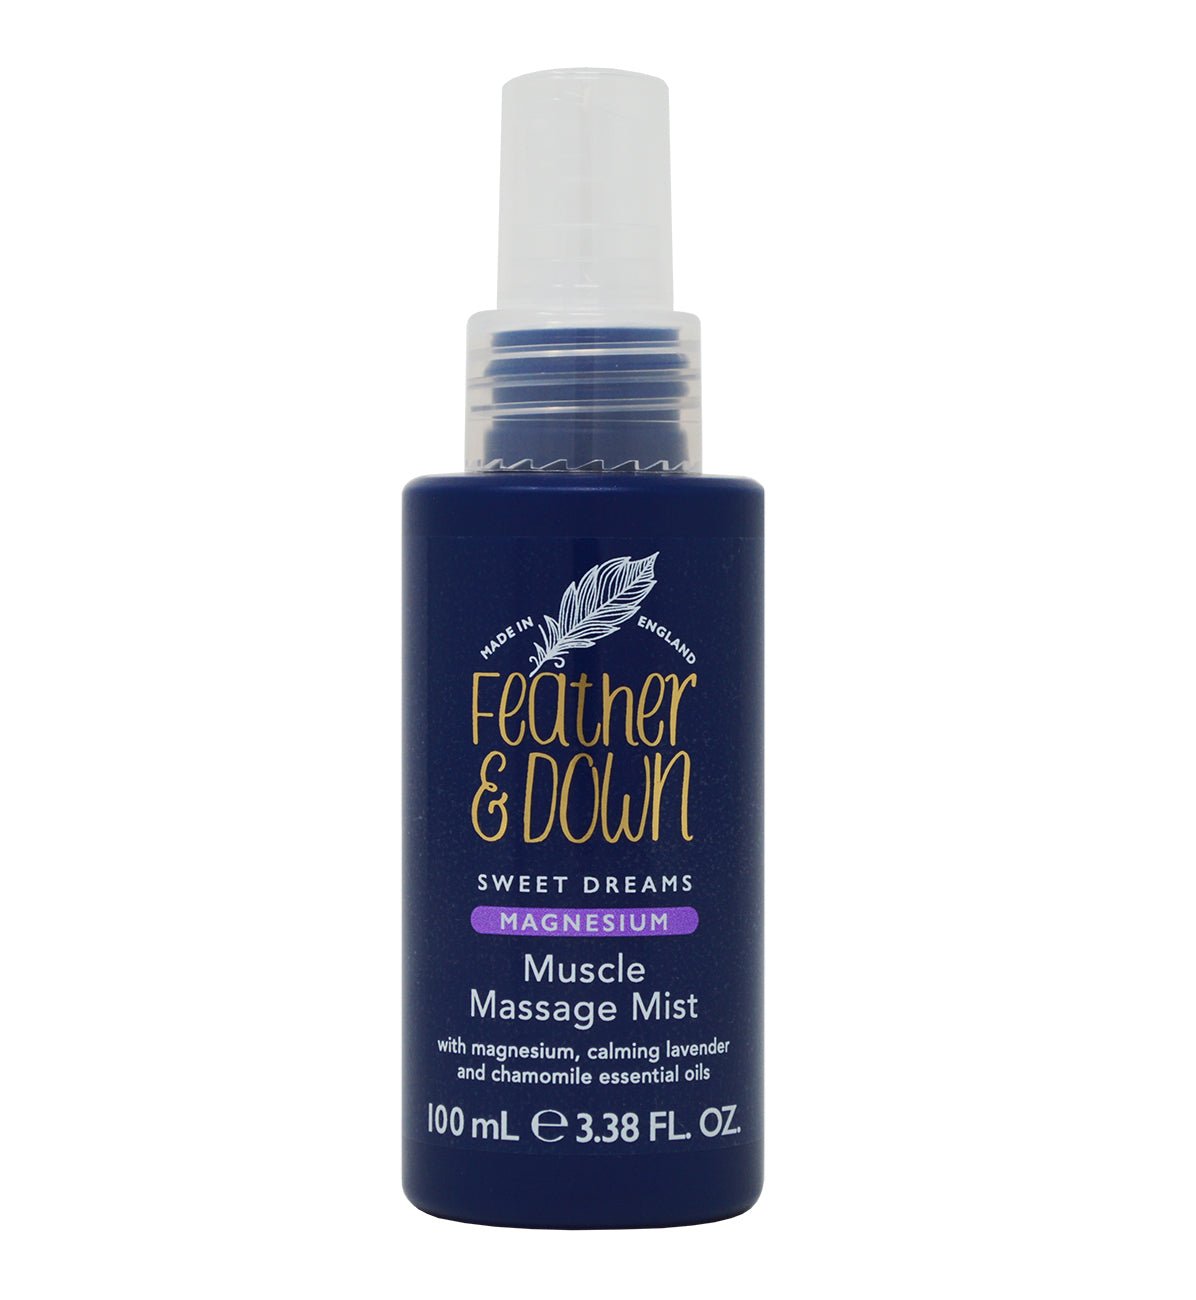 MAGENSIUM MUSCLE MASSAGE MIST - Feather and Down 